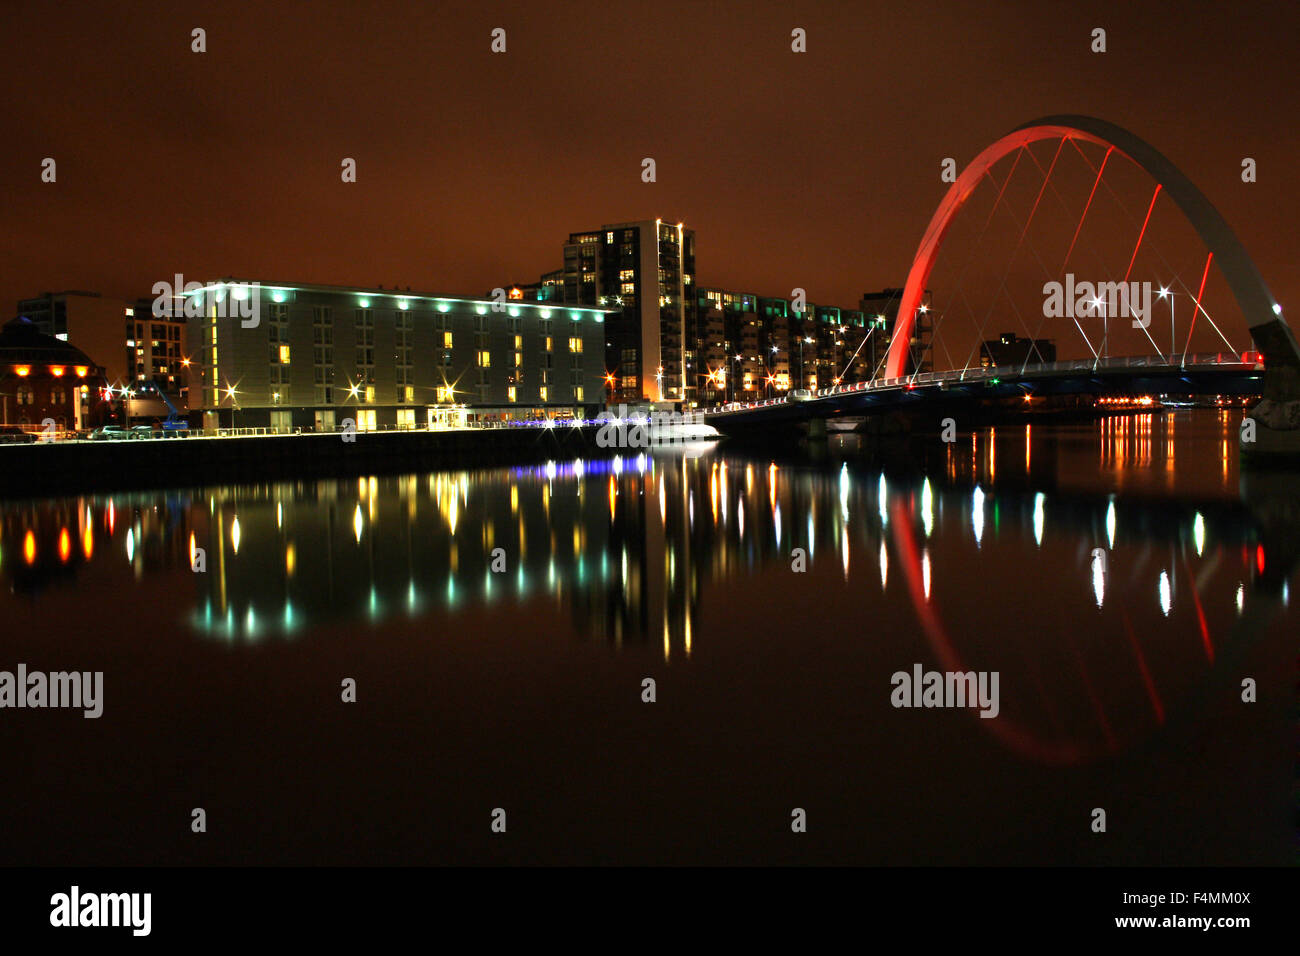 Glasgow Clyde Arc Bridge, also known as Finnieston Bridge, with reflections in River Clyde at Night. Stock Photo